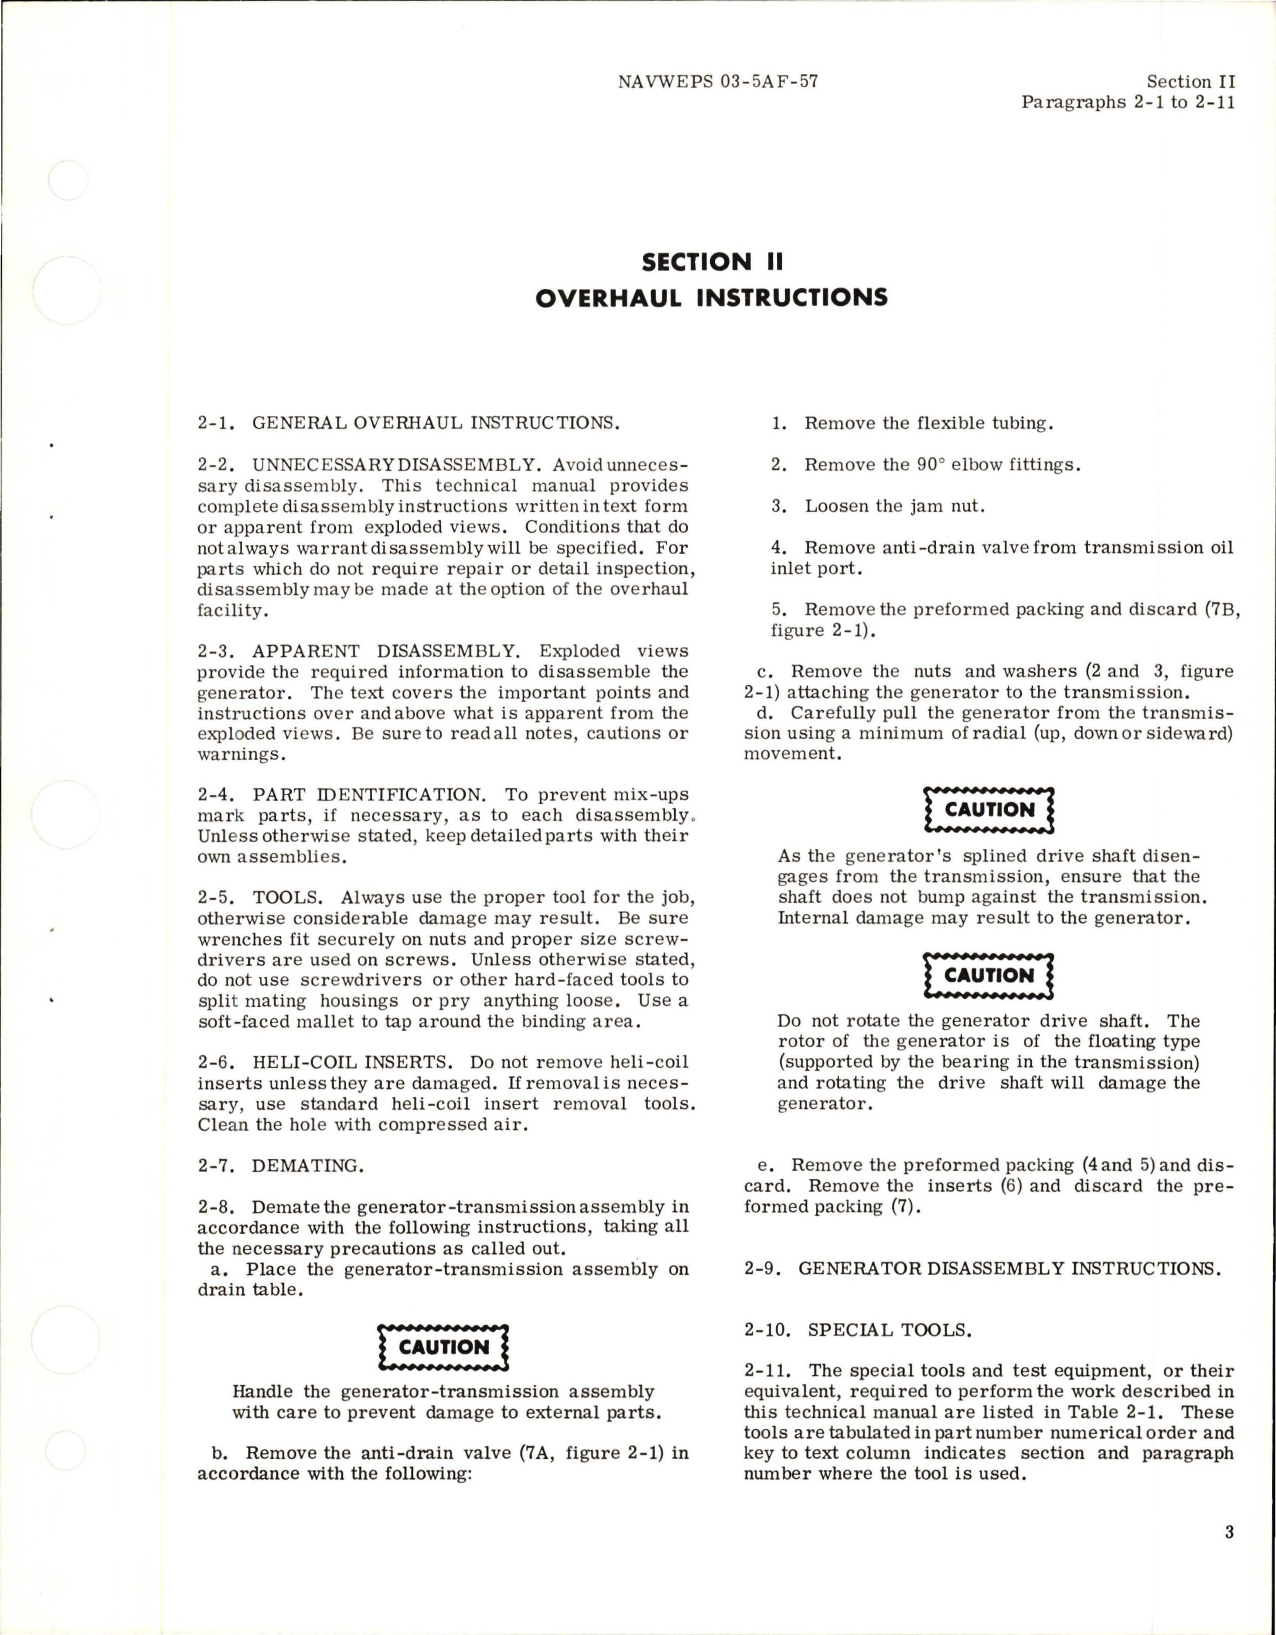 Sample page 9 from AirCorps Library document: Overhaul Instructions for AC Generator - Part 903J824-4